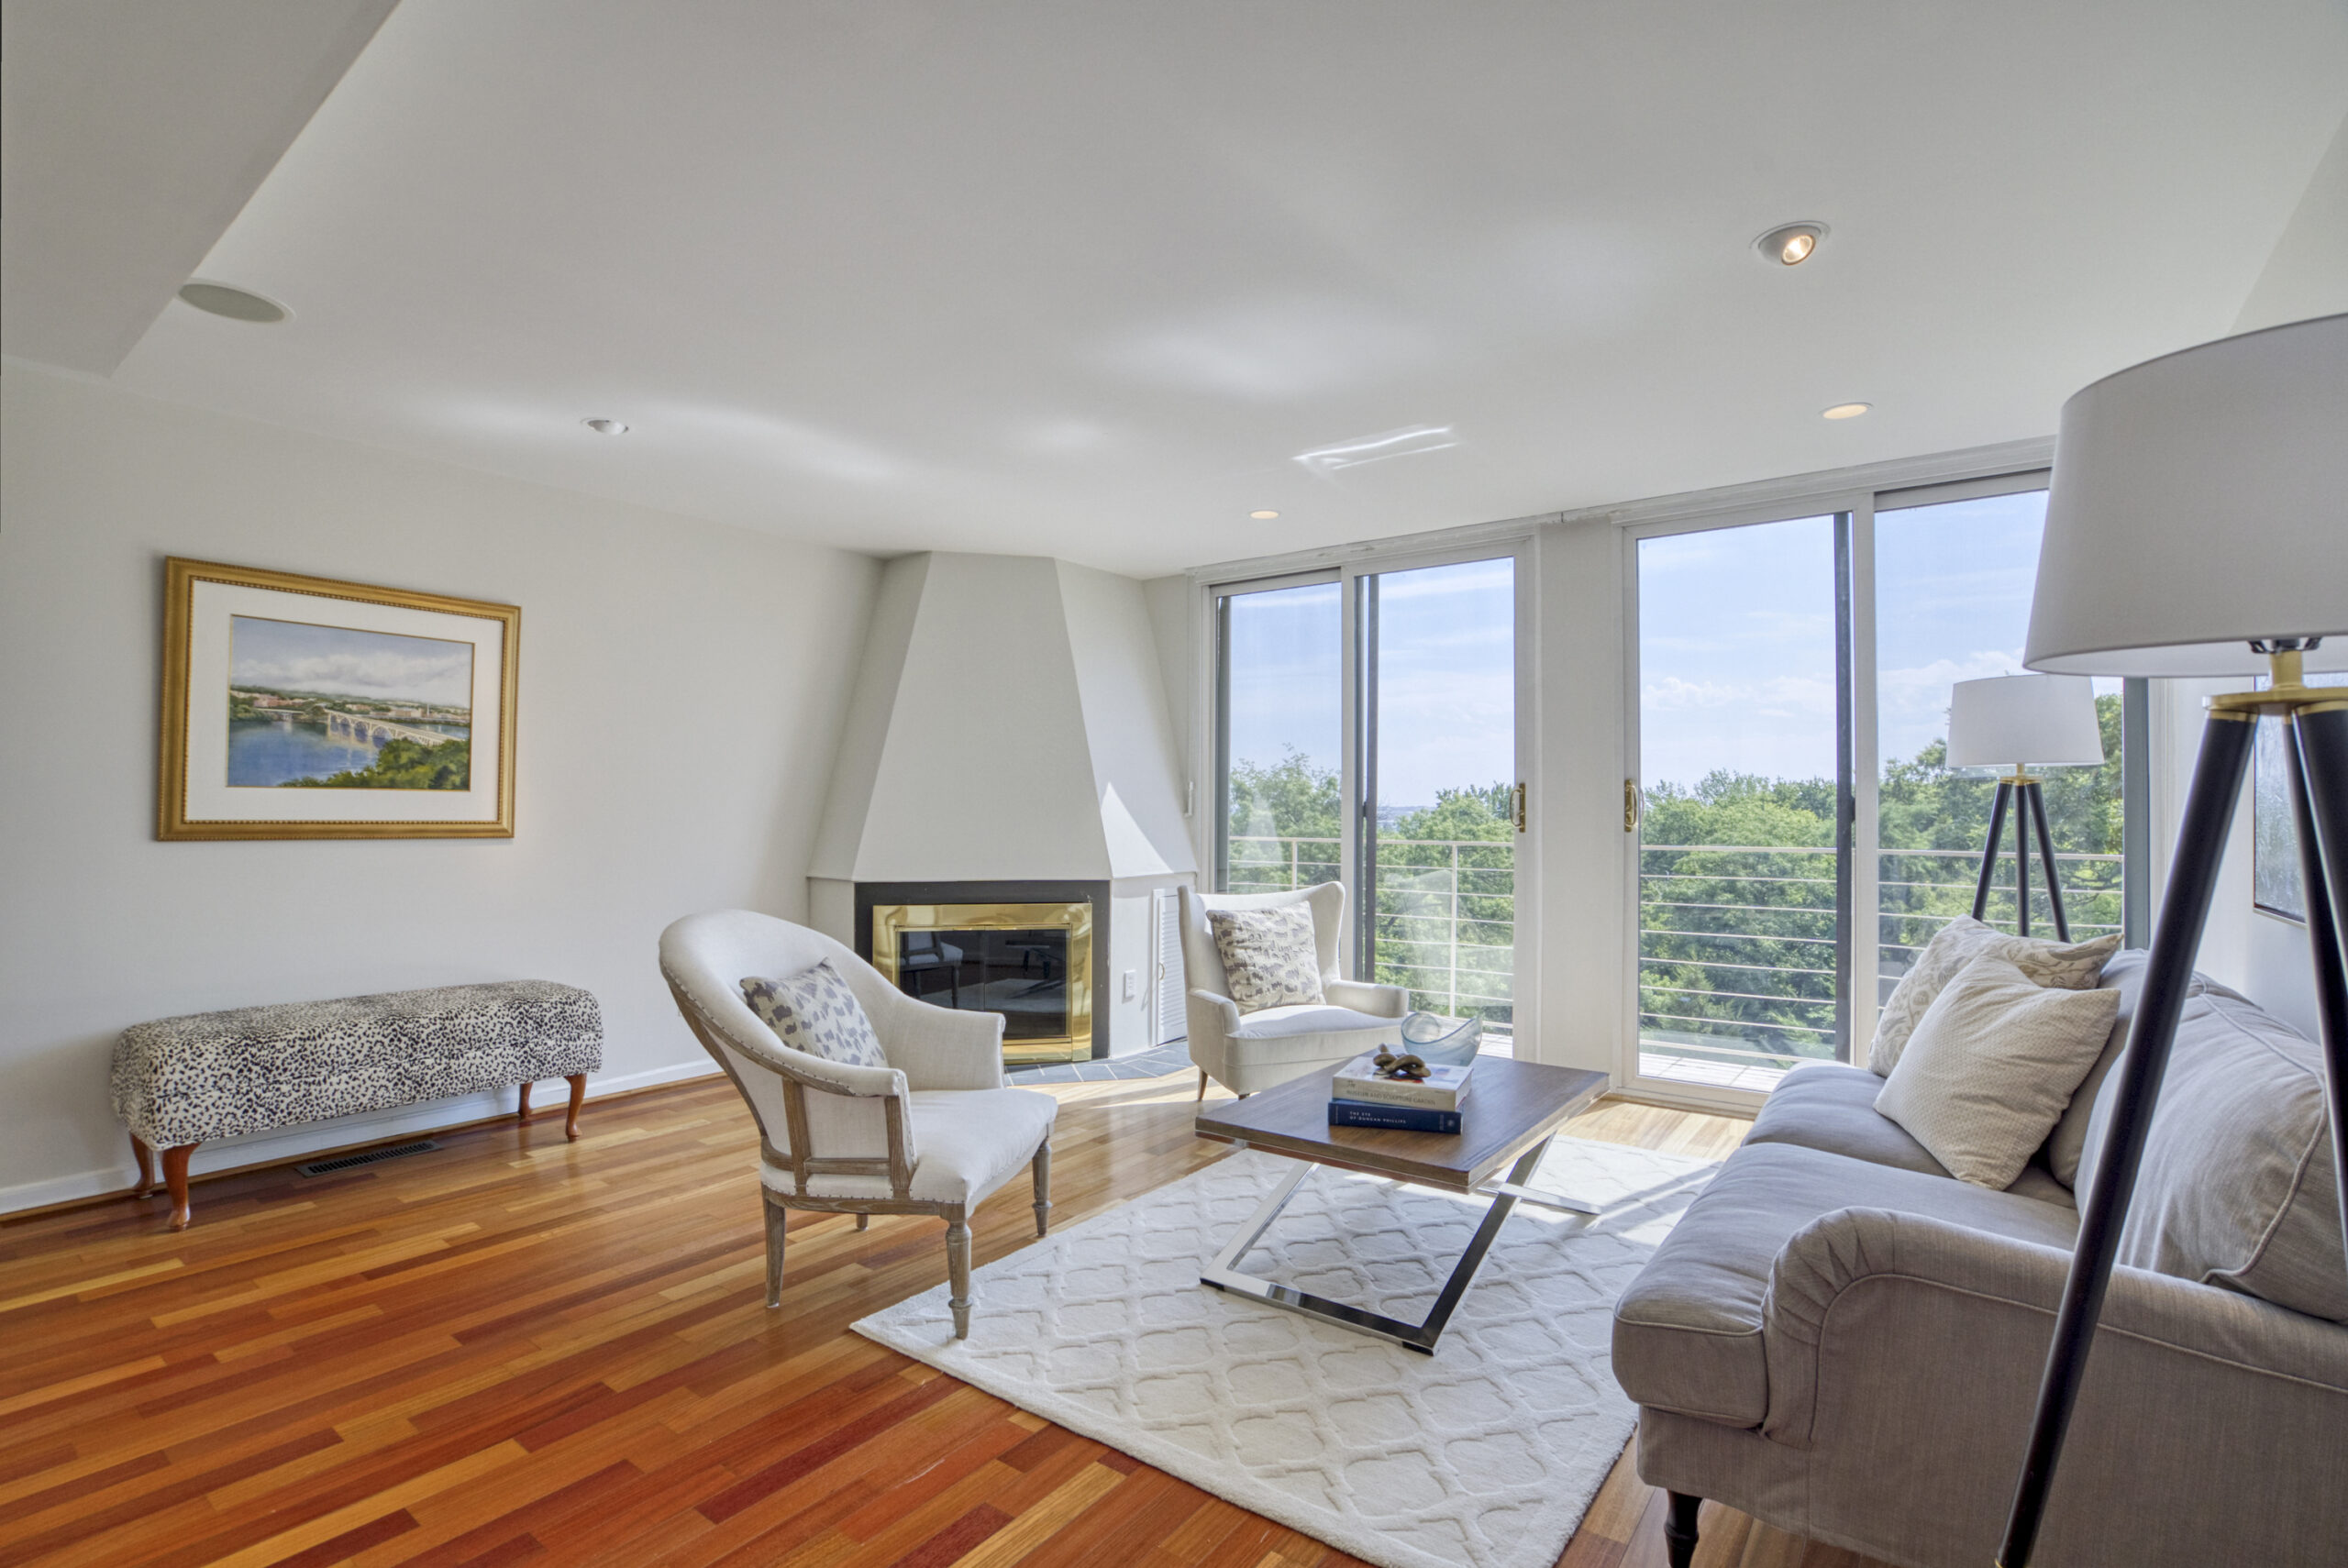 Professional interior photo of 1215 N Nash St #1, Arlington - showing the living room from the perspective of standing in the hallways with hardwood floors, built-in fireplace and large glass balcony doors